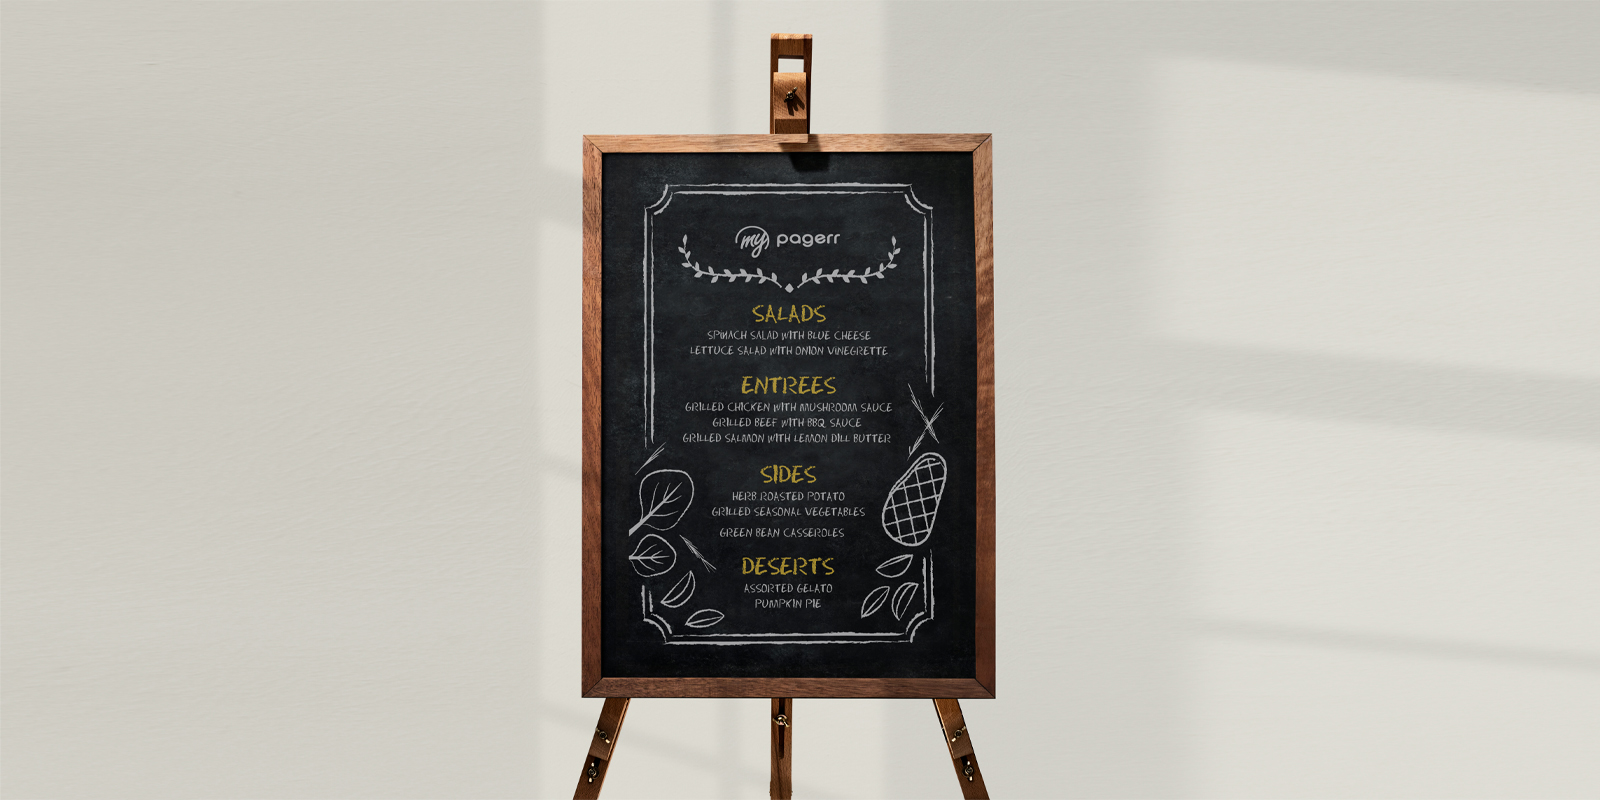 Chalkboard signs in Berlin - Print with Pagerr